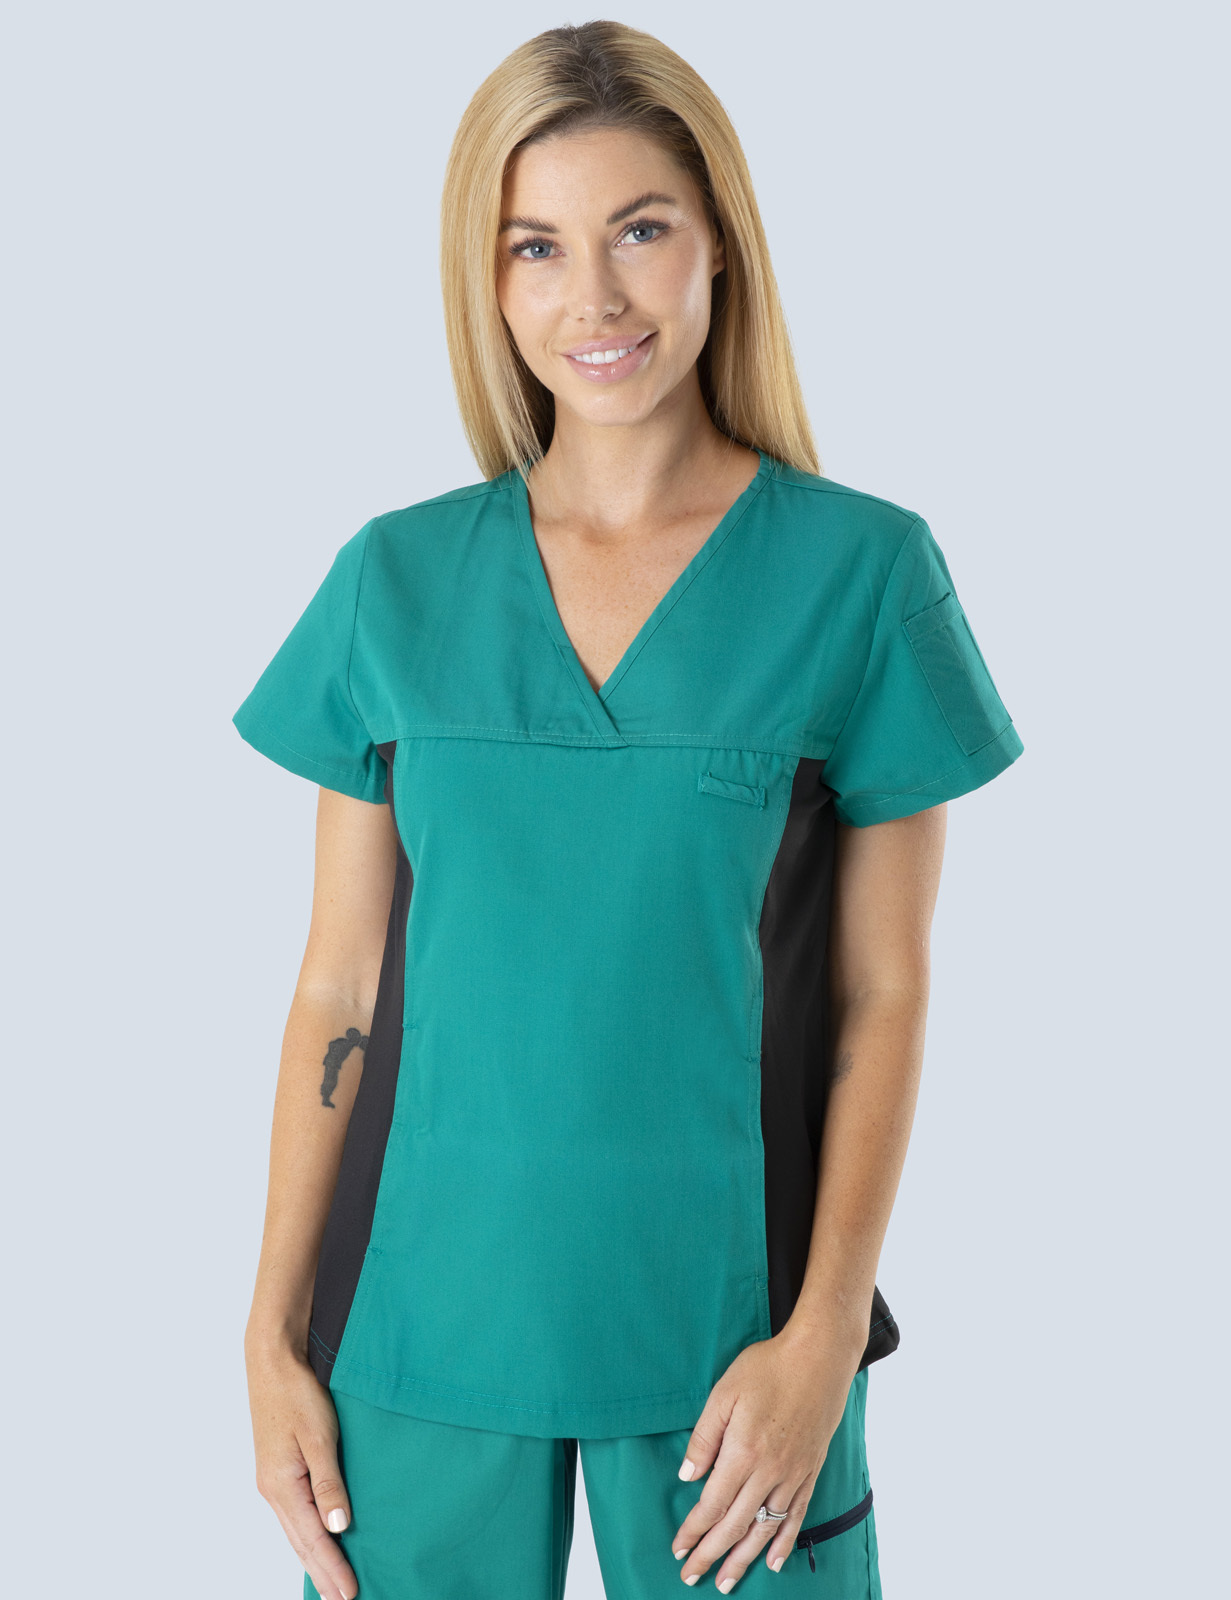 Pathology North - Coffs Harbour (Women's Fit Spandex Scrub Top in Hunter incl Logos)